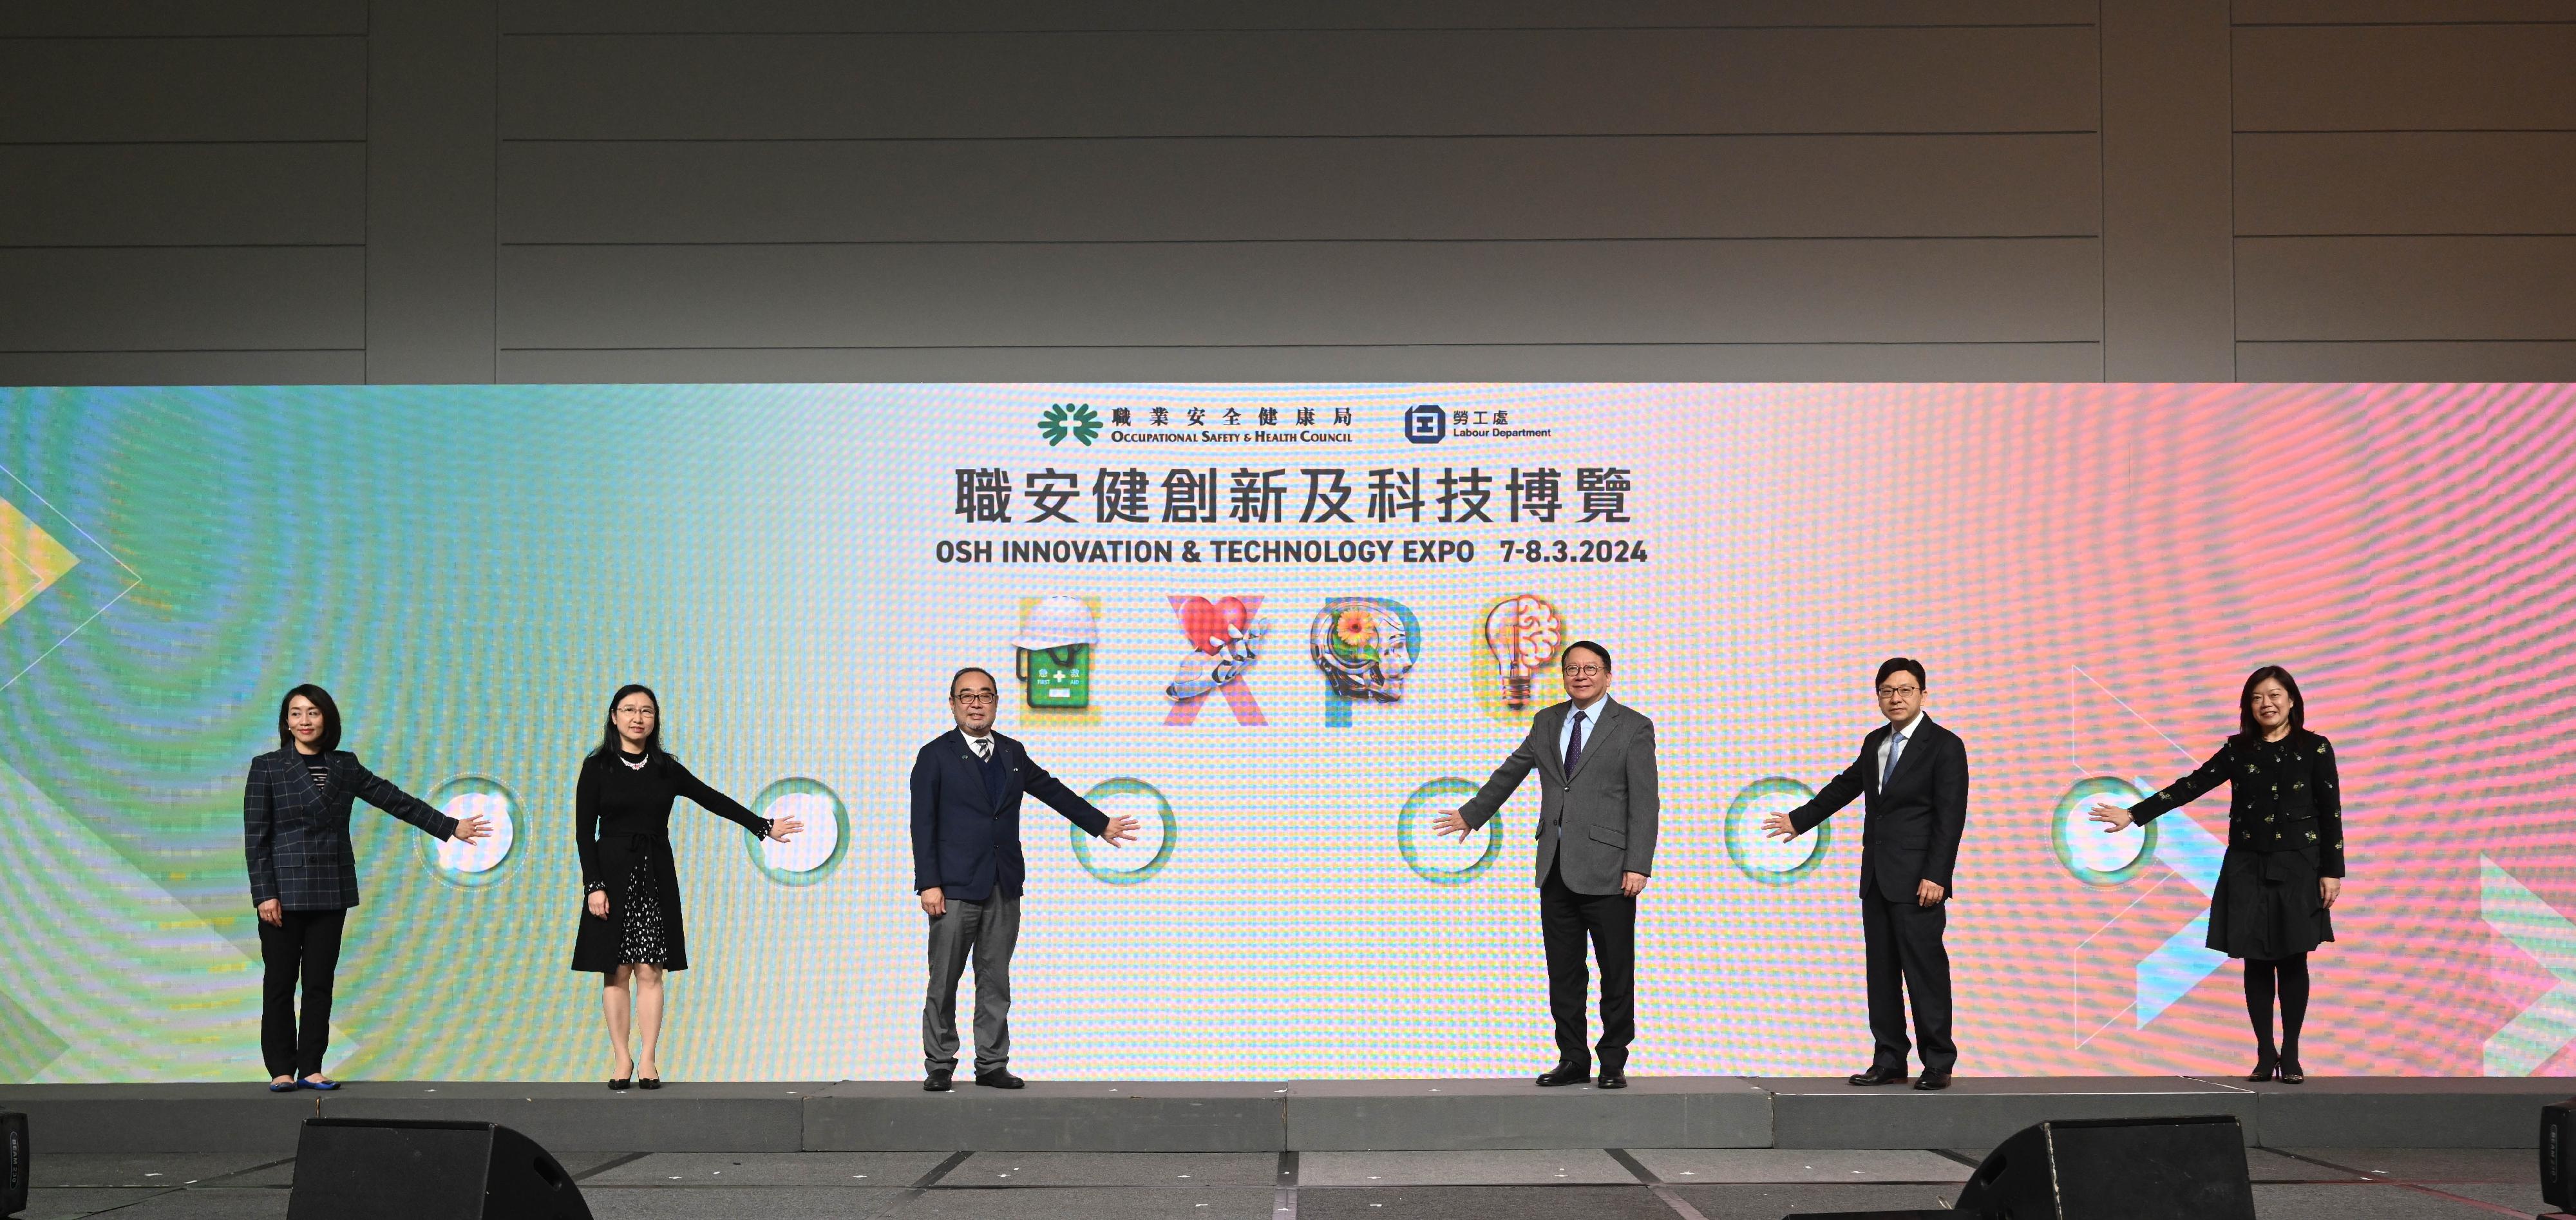 The Chief Secretary for Administration, Mr Chan Kwok-ki, attended the opening ceremony of the OSH Innovation & Technology Expo today (March 7). Photo shows (from second right) the Secretary for Labour and Welfare, Mr Chris Sun; Mr Chan;  the Chairman of the Occupational Safety and Health Council, Dr David Mong, and other guests officiating at the ceremony.
